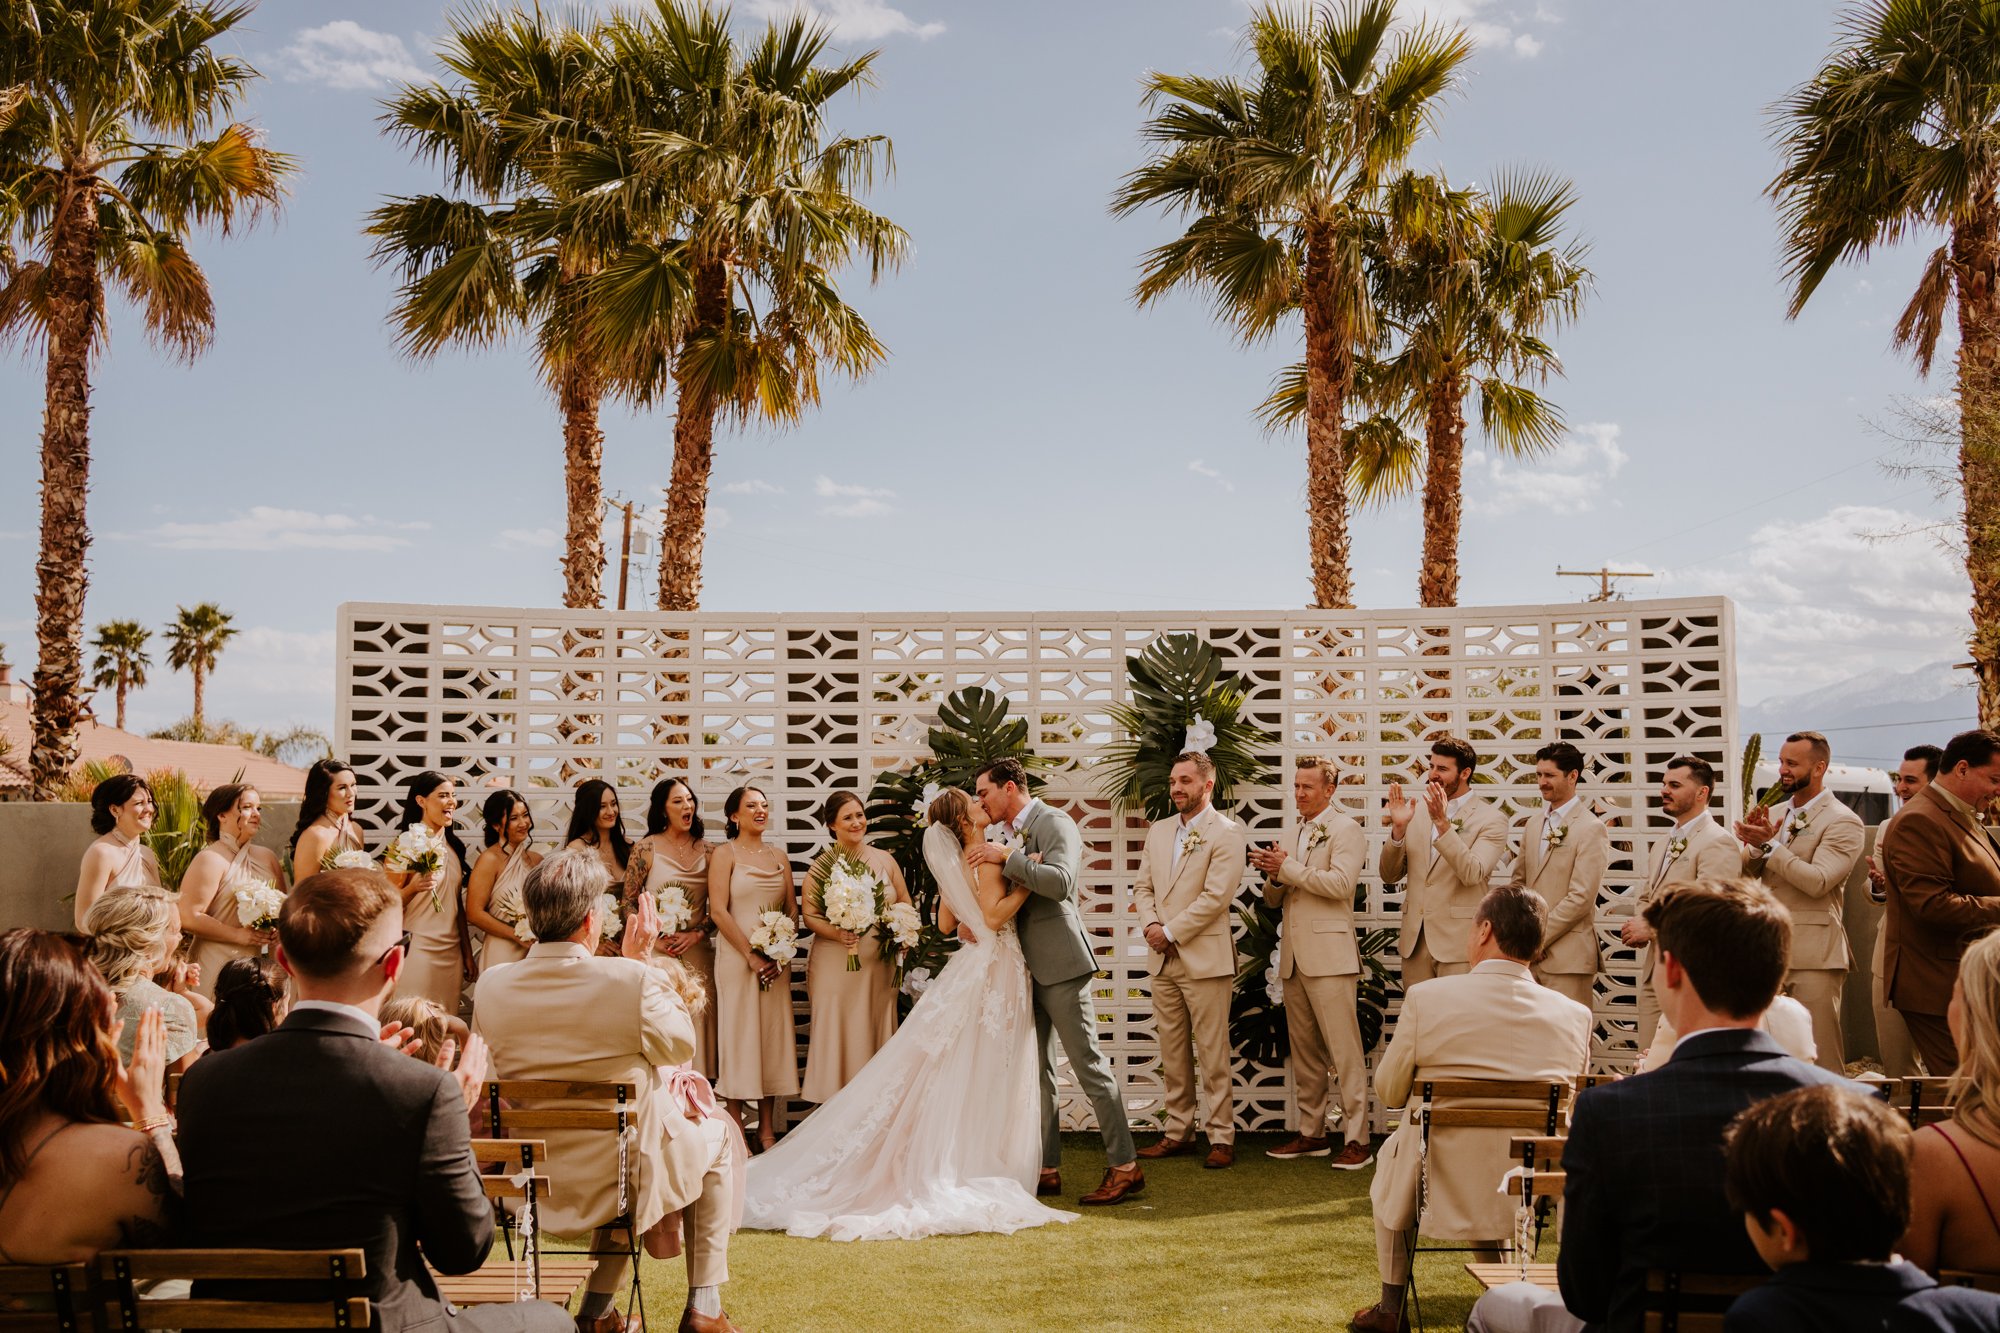 The Lautner Compound Palm Springs Wedding ceremony | Tida Svy Photography | www.tidasvy.com